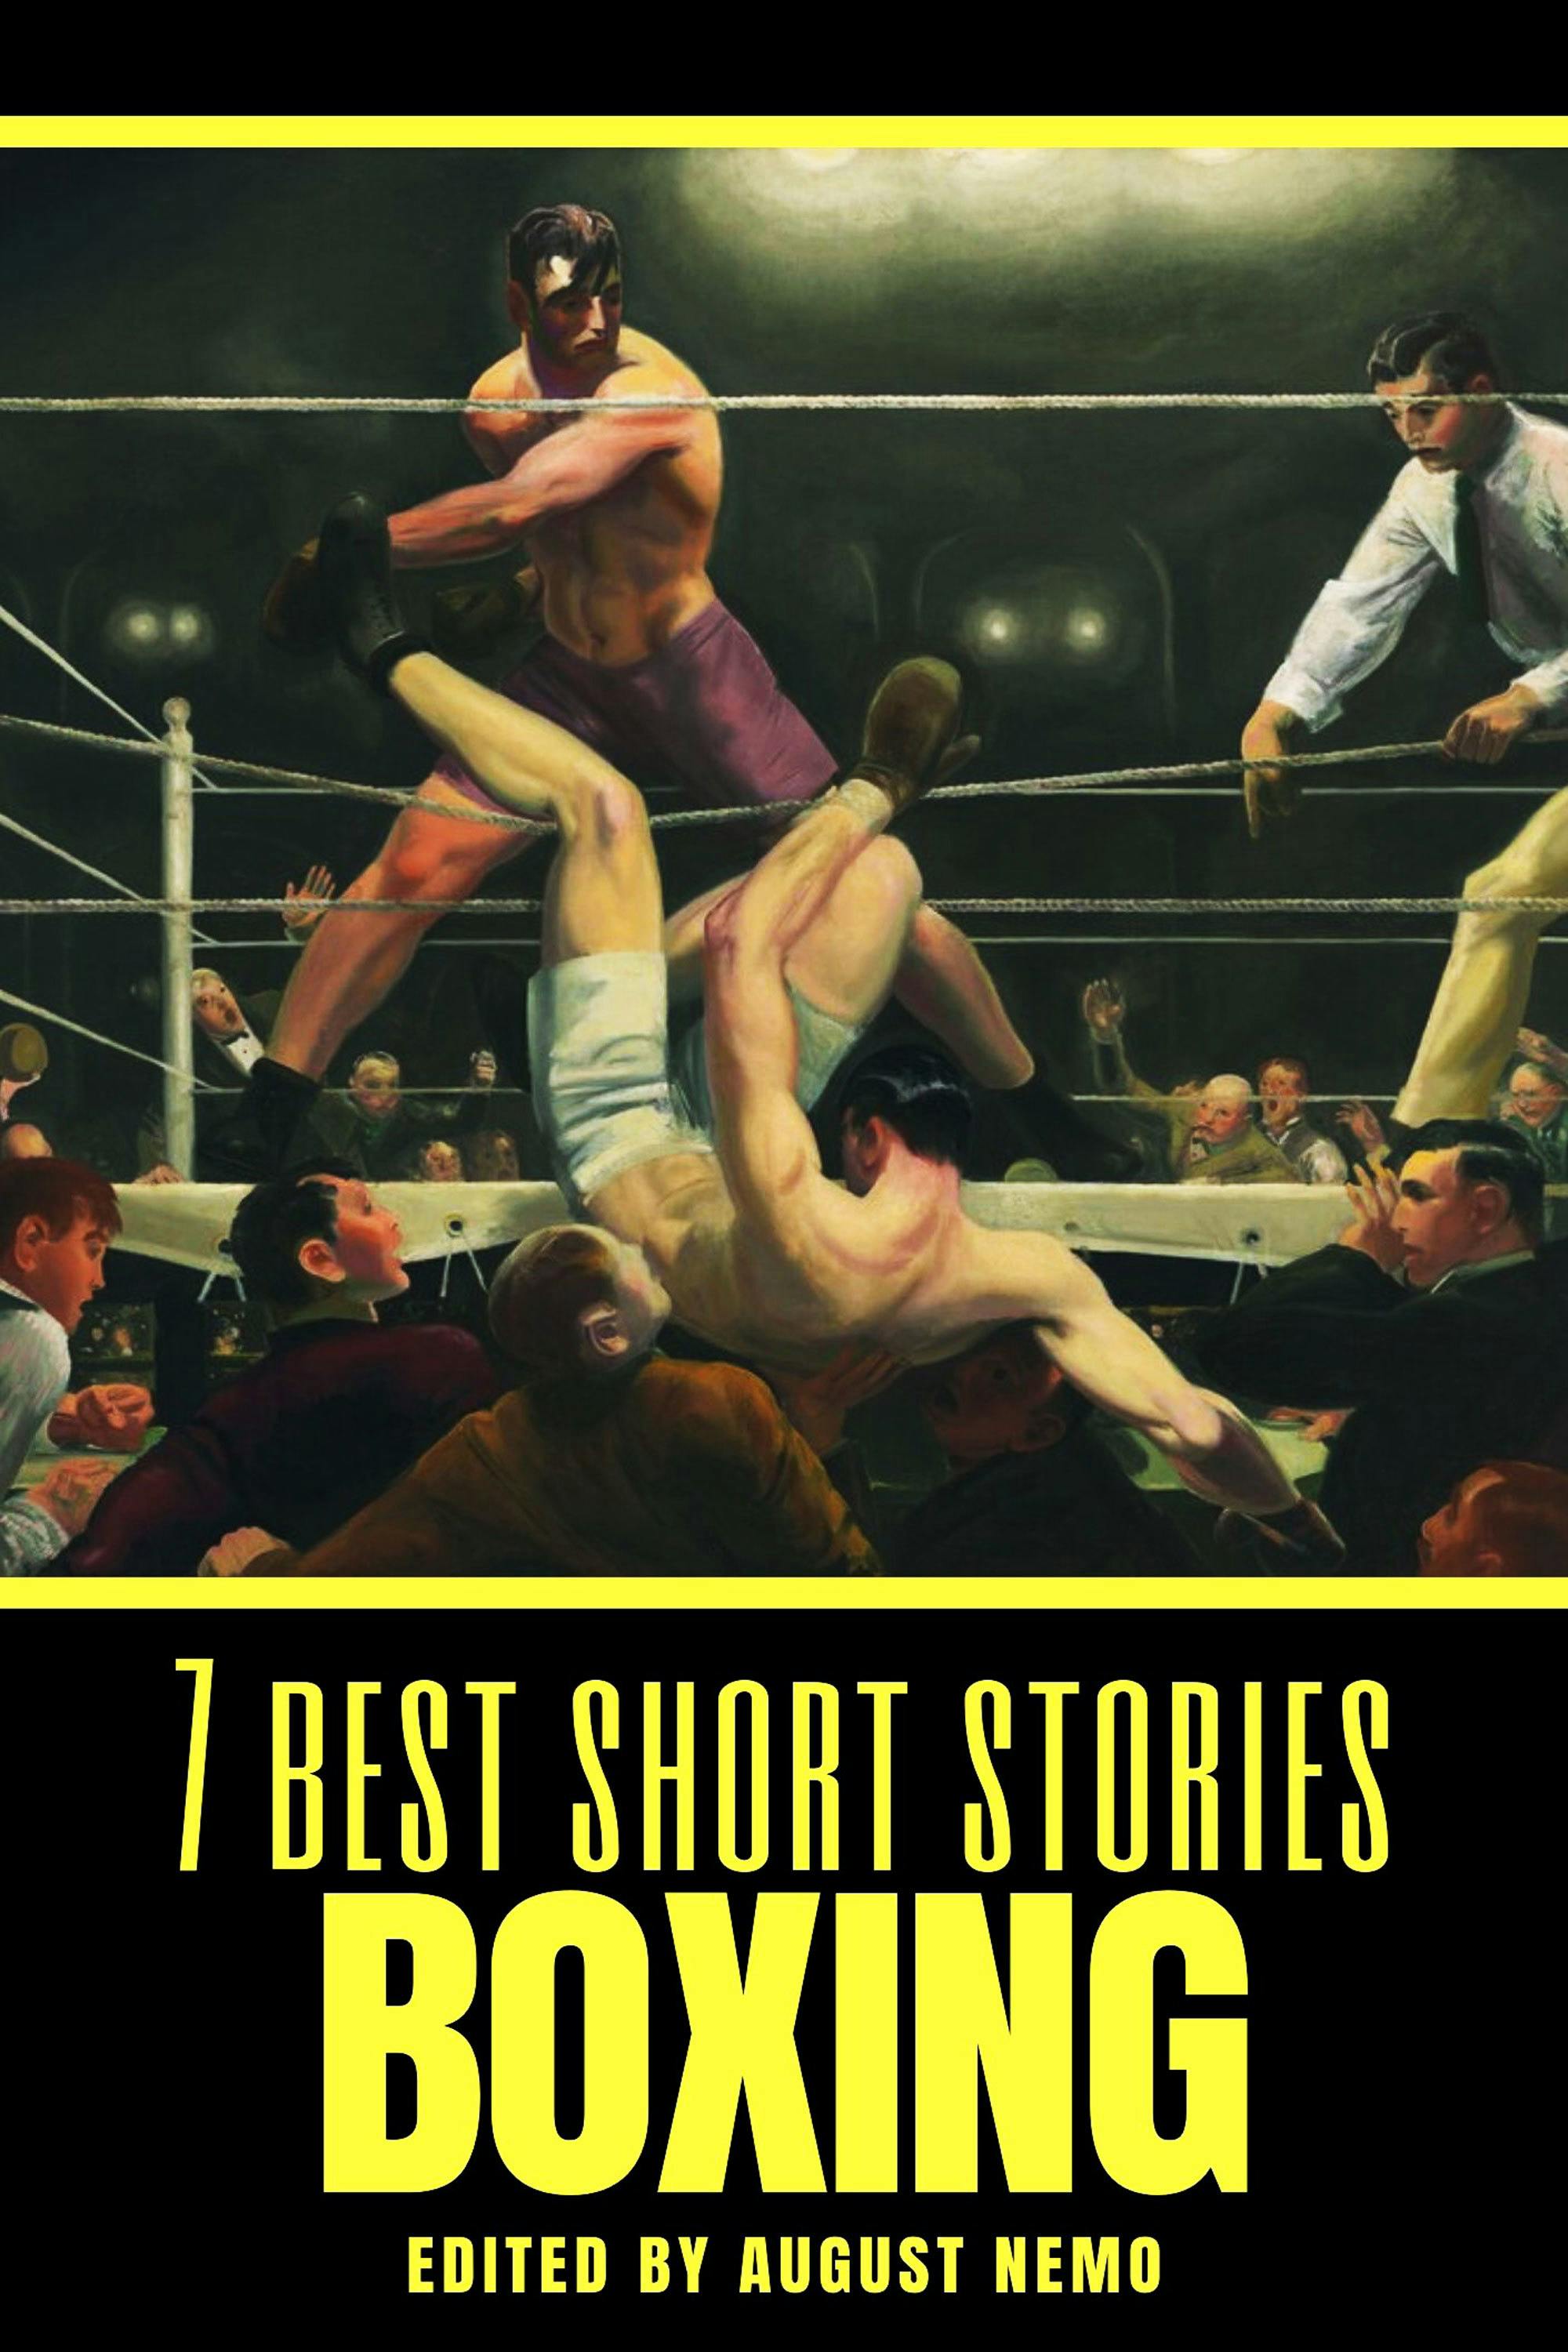 7 best short stories - Boxing - undefined